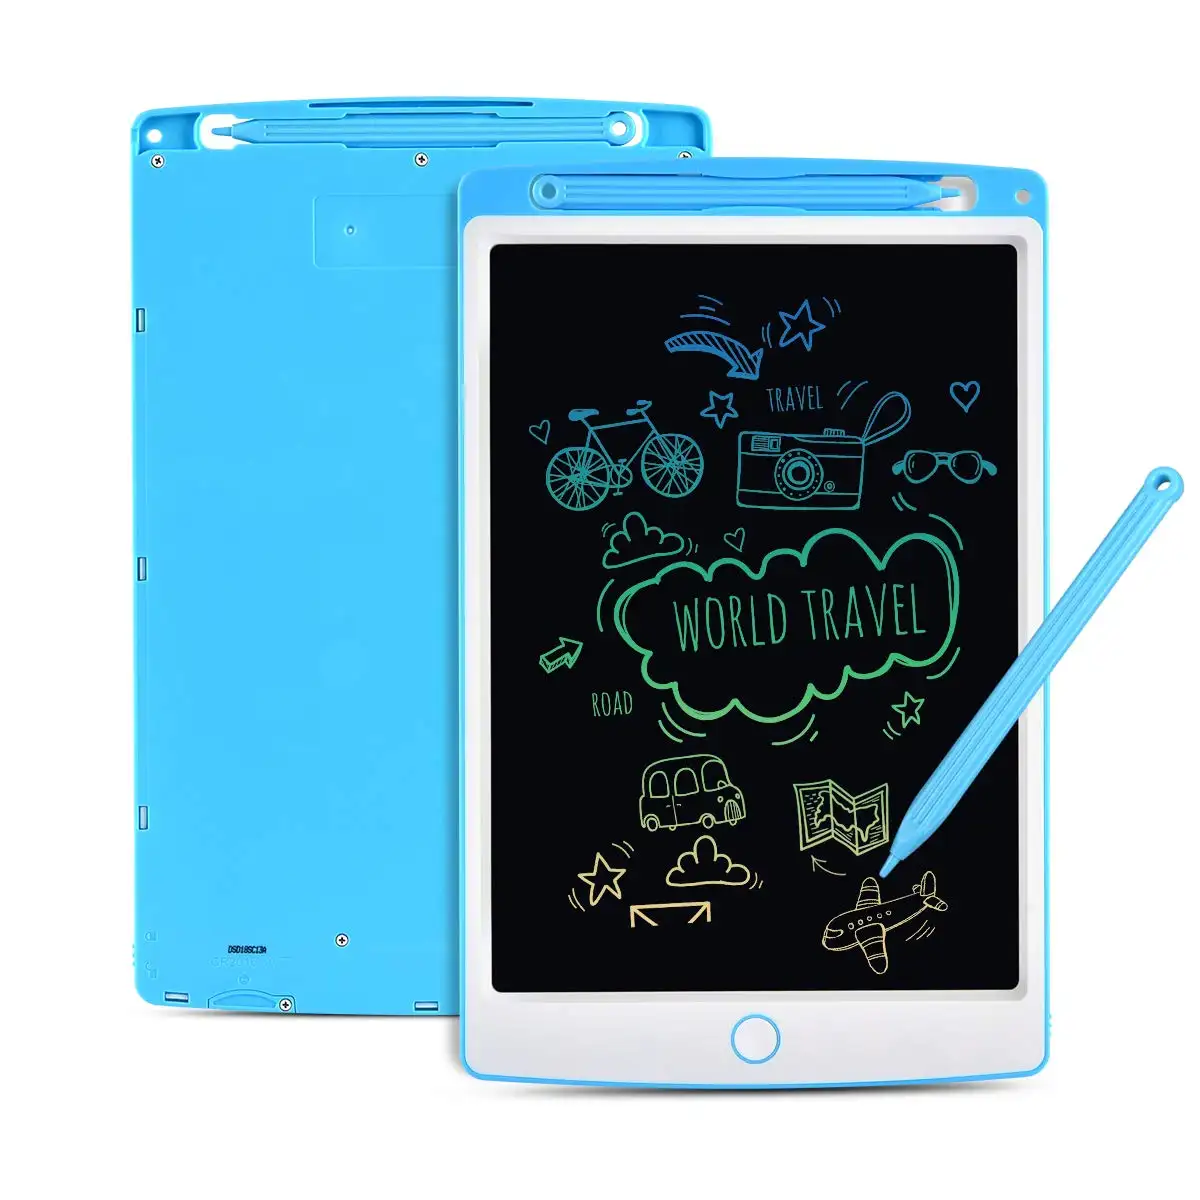 Lcd Writing Board POLICRAL 10 Inch LCD Colorful Writing Tablet Electronic Writing Board Doodle Pad LCD Drawing Board EWriter